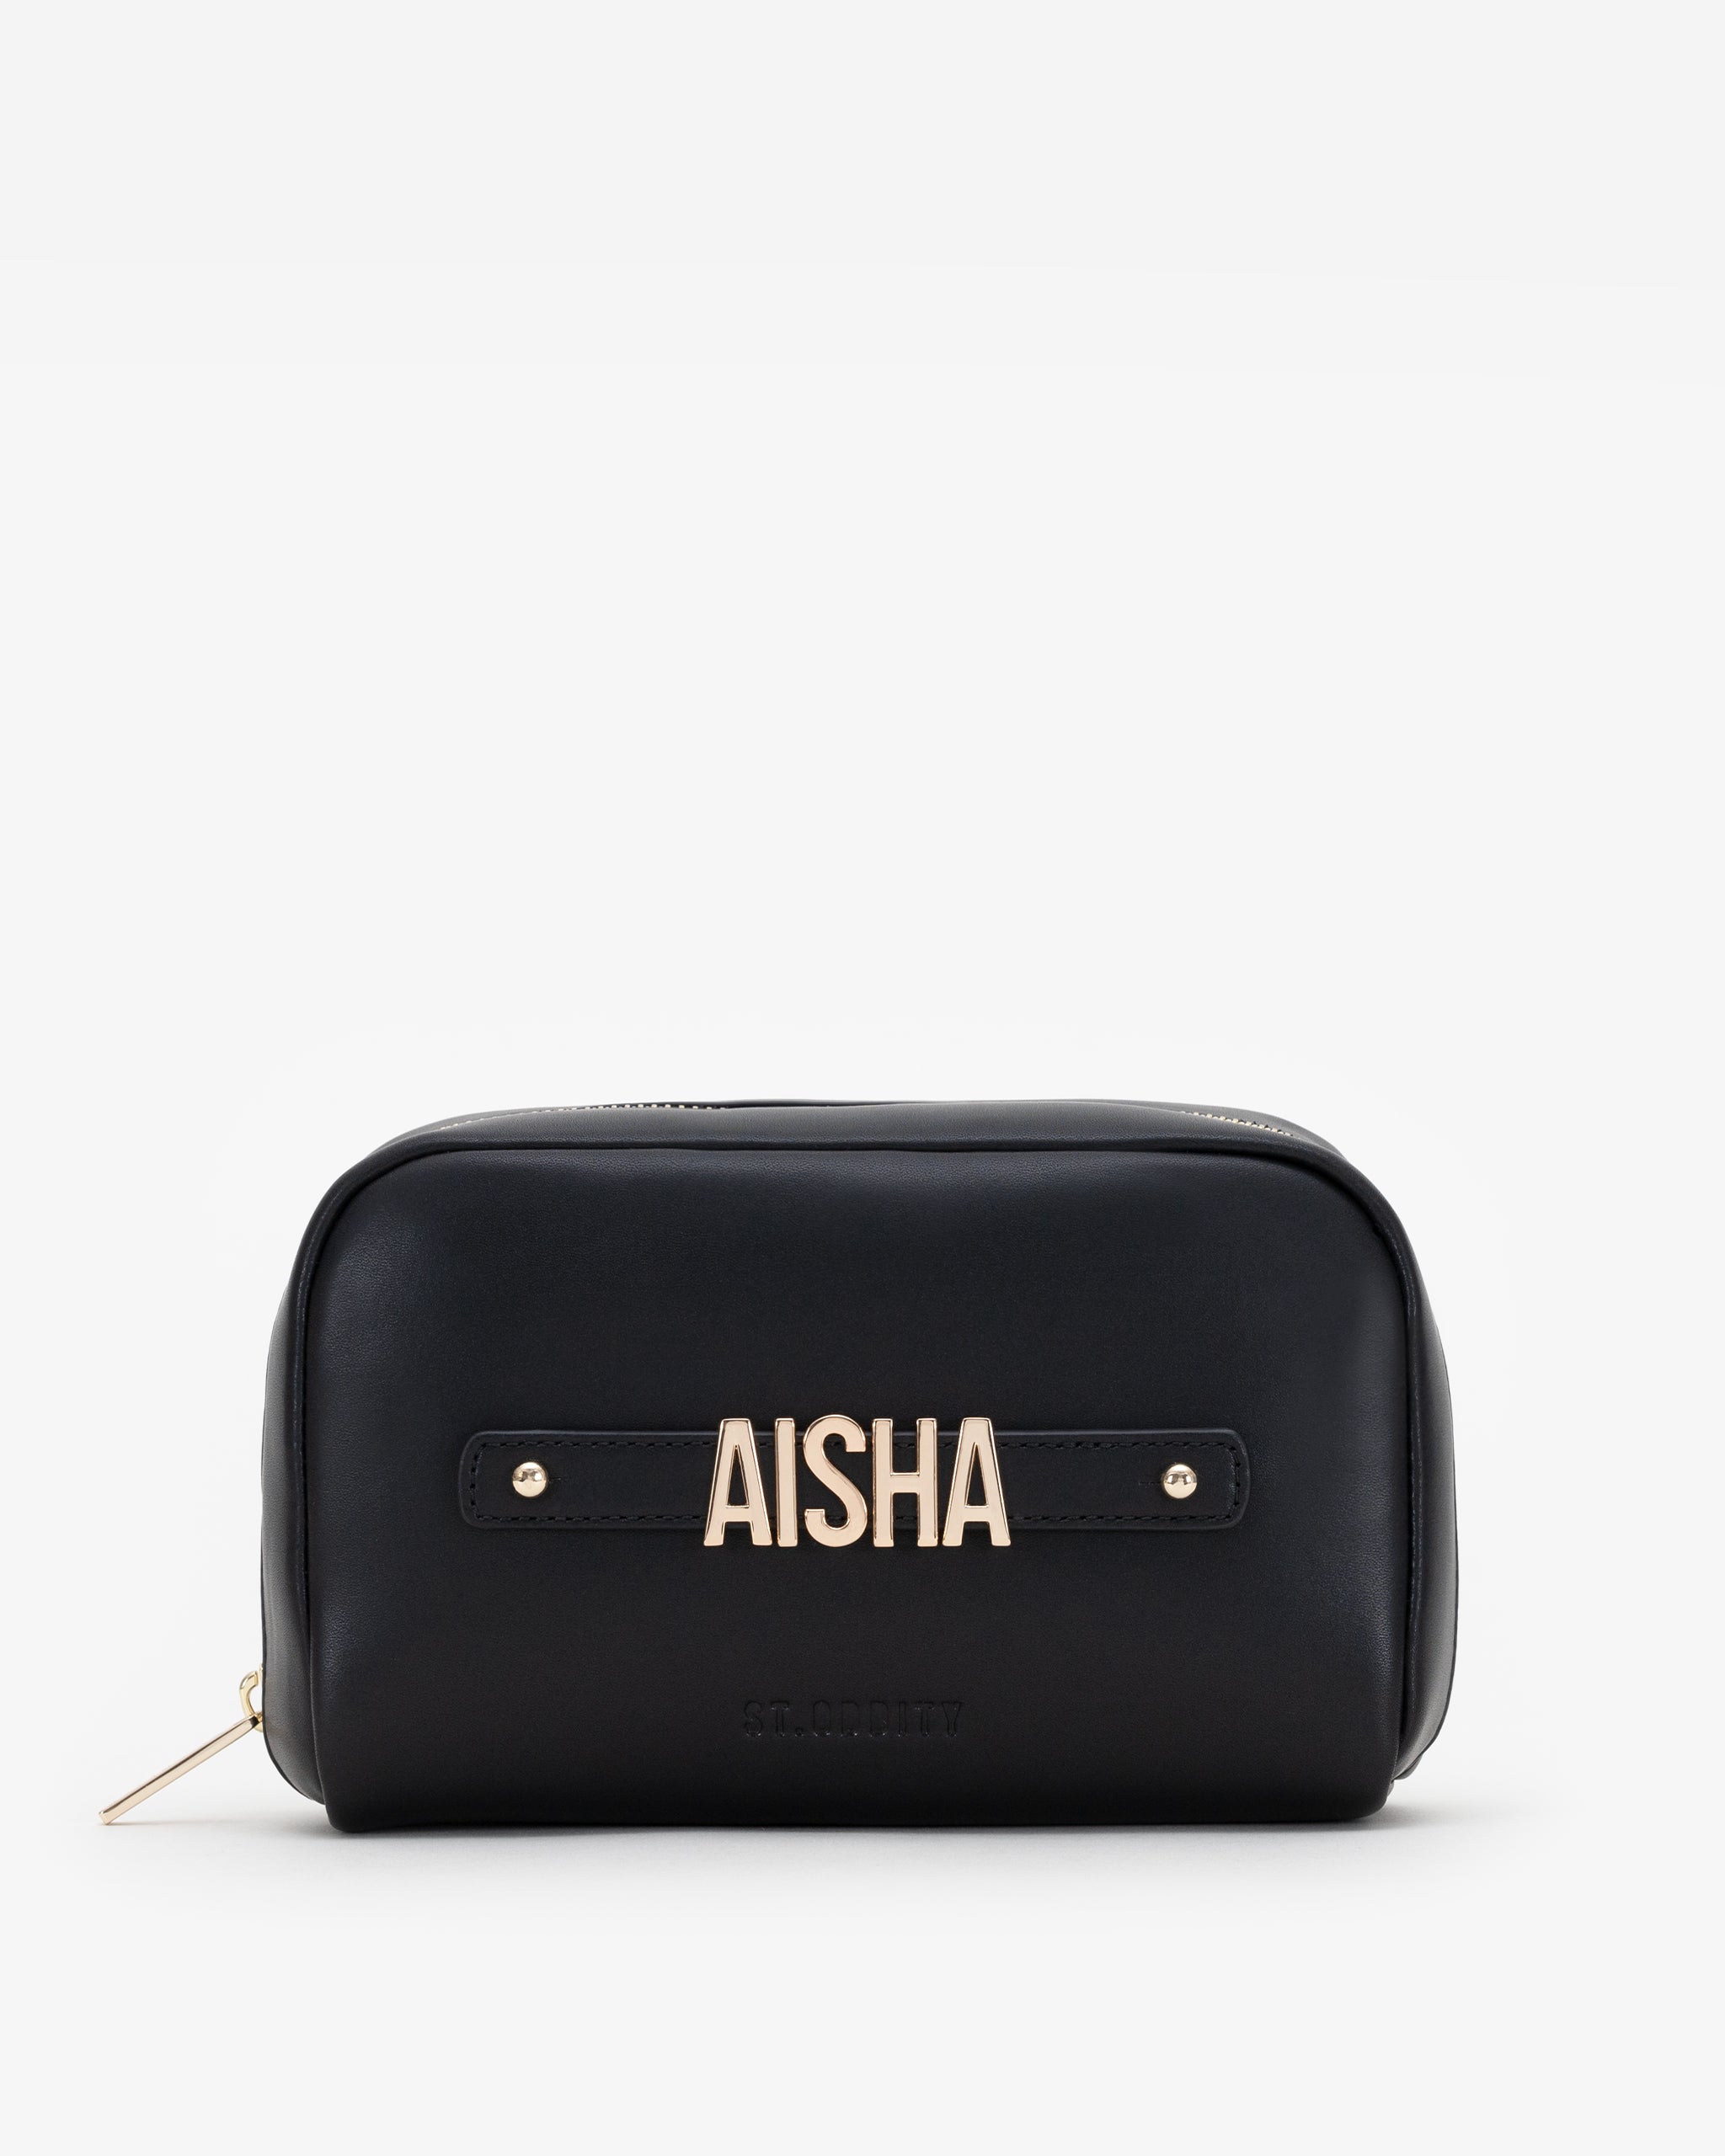 Pre-order (Mid-May): Cosmetic Pouch in Black/Gold with Personalised Hardware